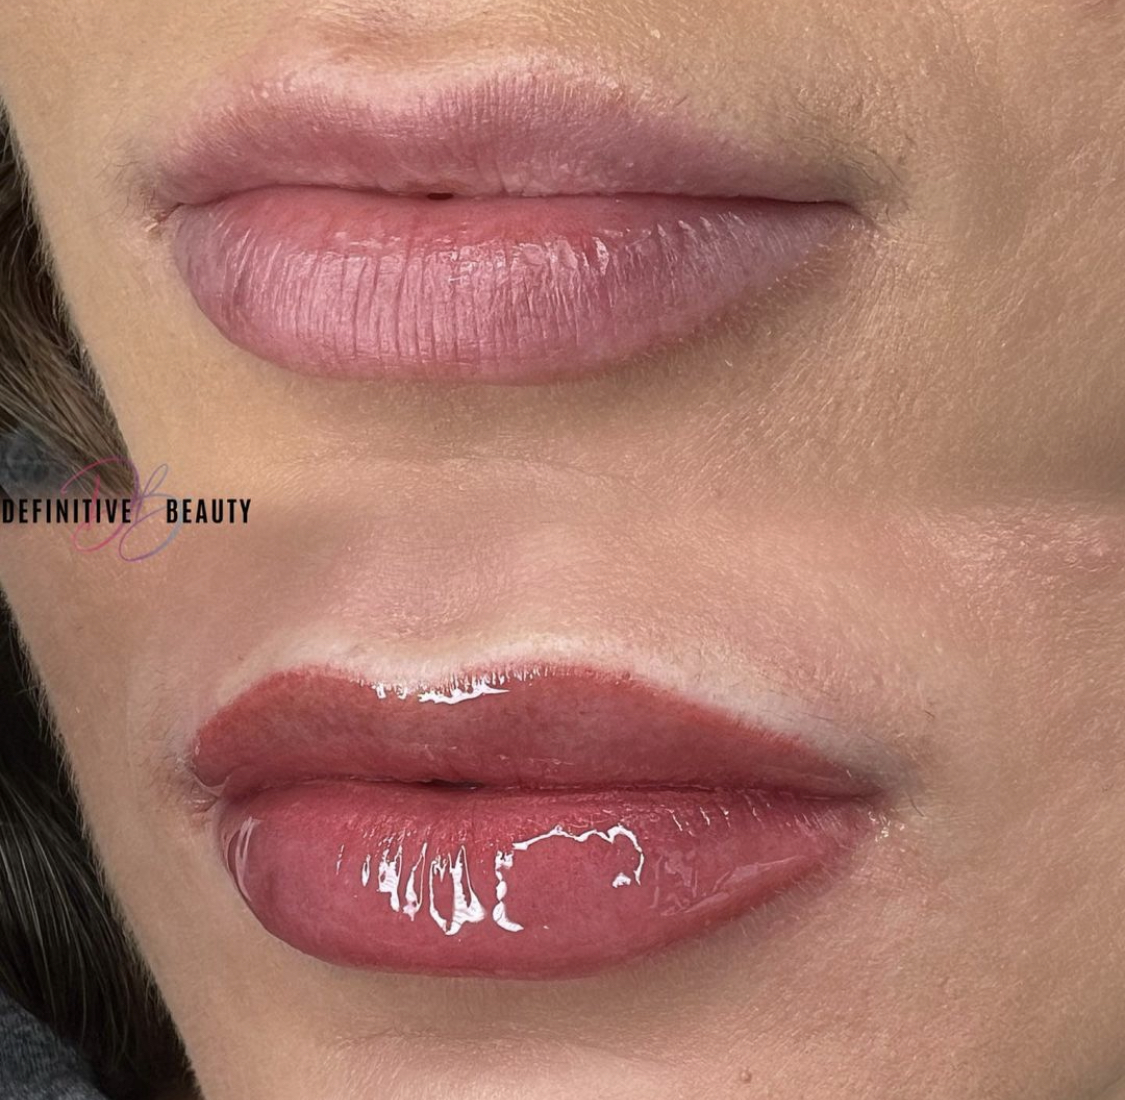 Before and after of a woman with full lips with lip blushing.